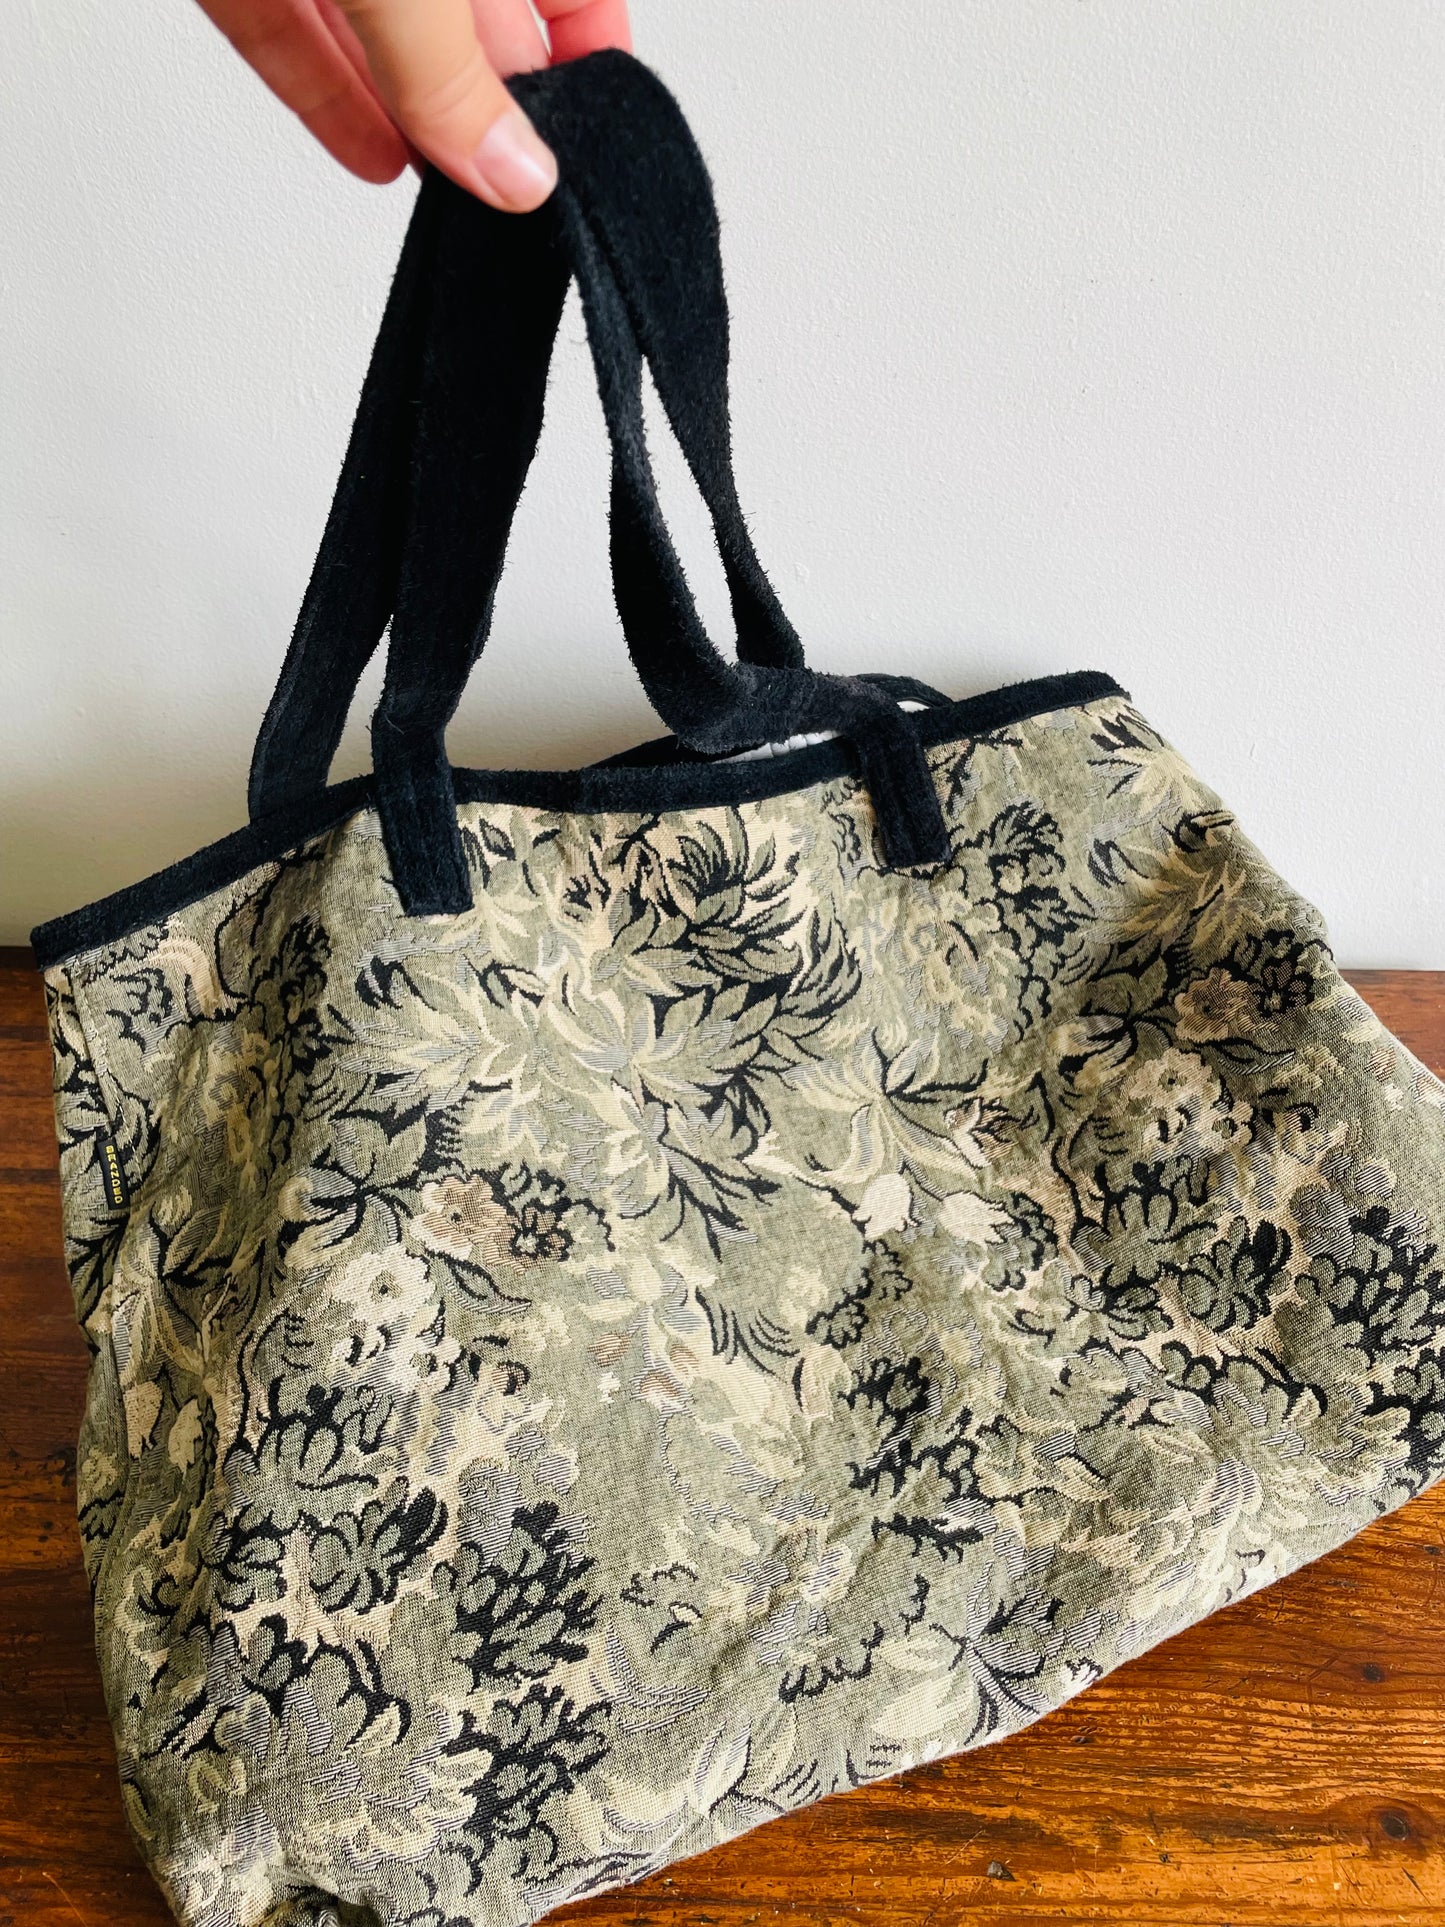 Giant Muted Floral Tapestry Carpet Tote Bag with Leather Handles & Lined Interior - Made in USA